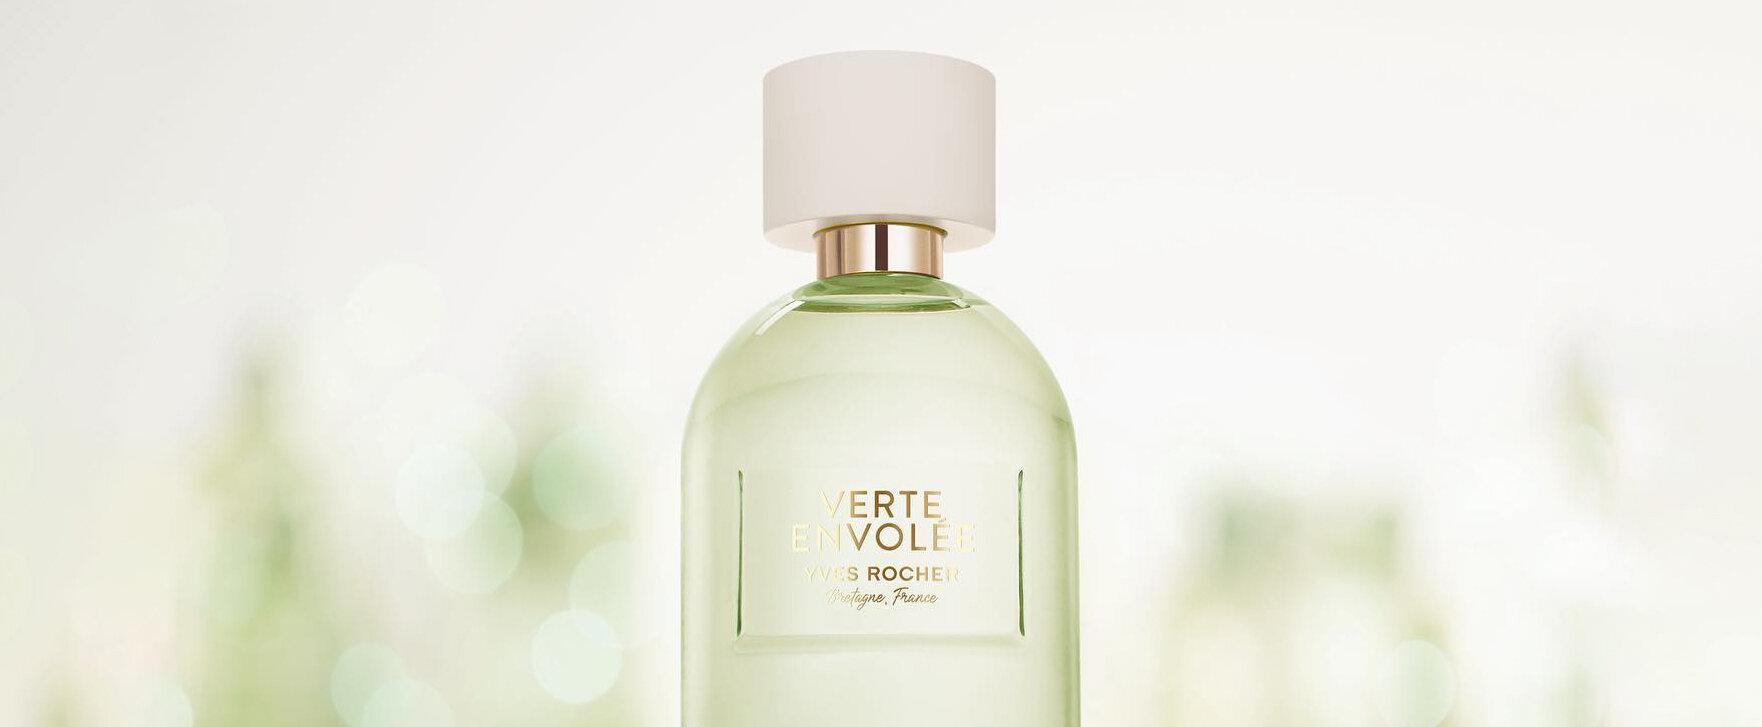 “Verte Envolée” - New Fragrance With Green and Fresh Notes by Yves Rocher